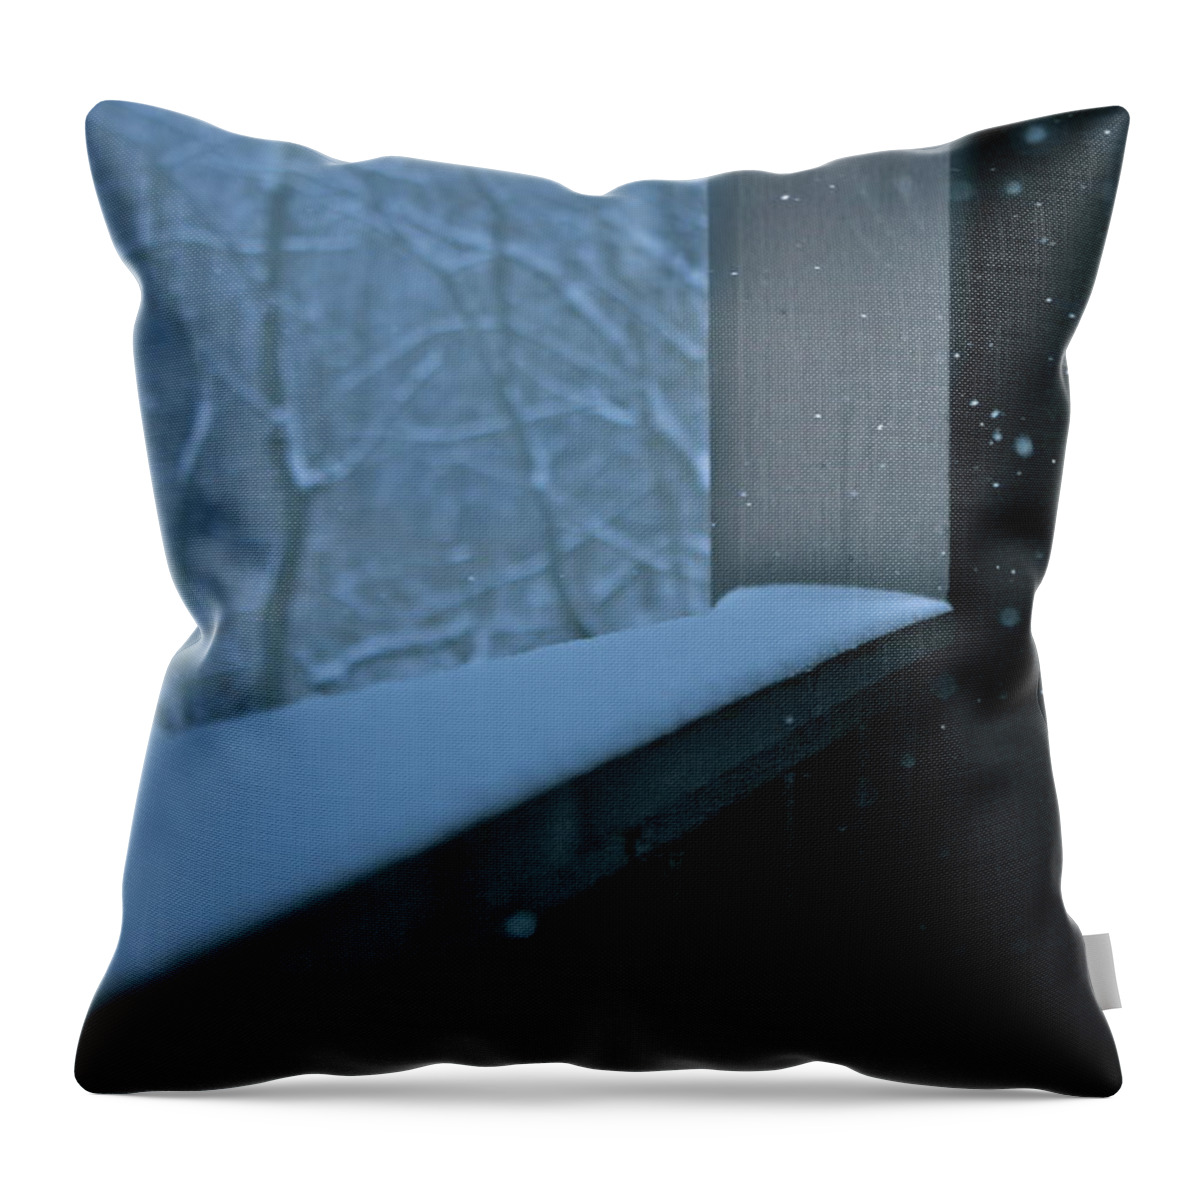 Nunweiler Throw Pillow featuring the photograph Keeping Warm by the Palace Window by Nunweiler Photography